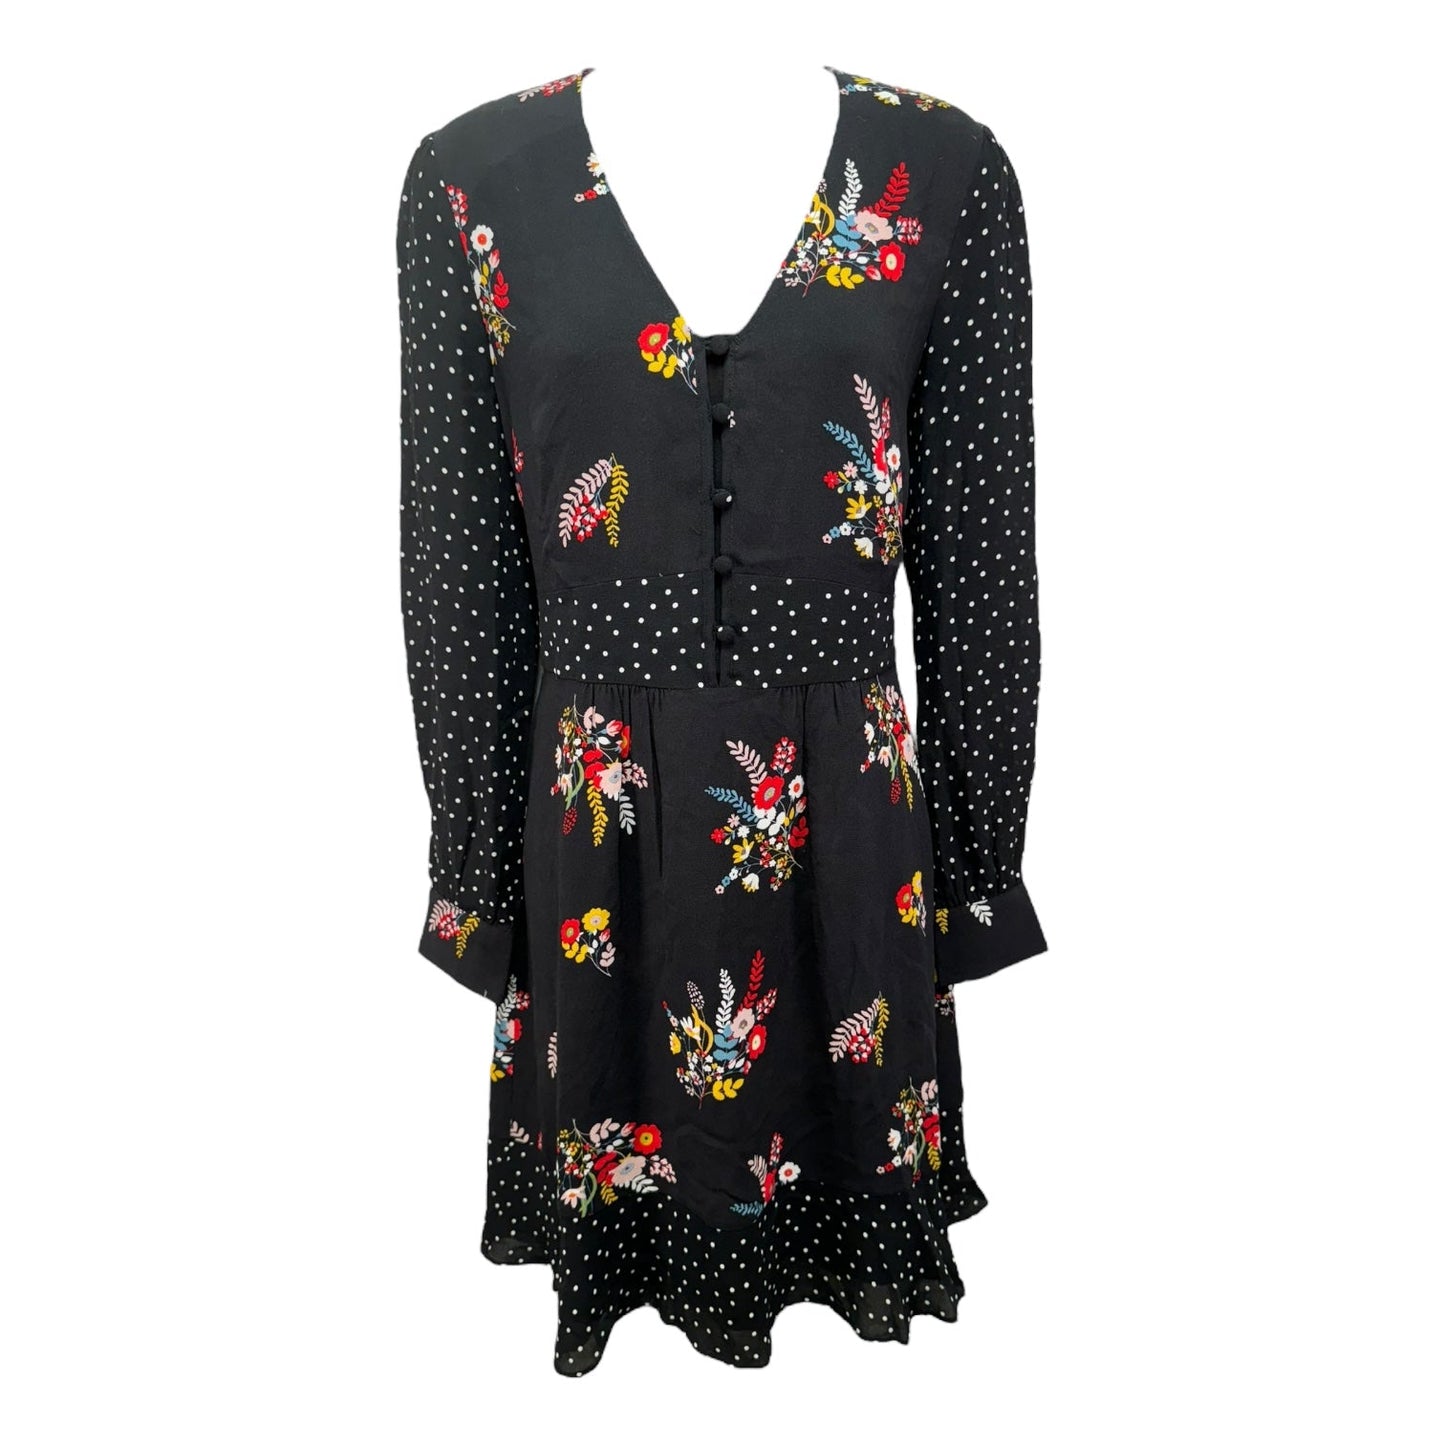 Ivy Dress in Black Country Posy
 Boden, Size 6